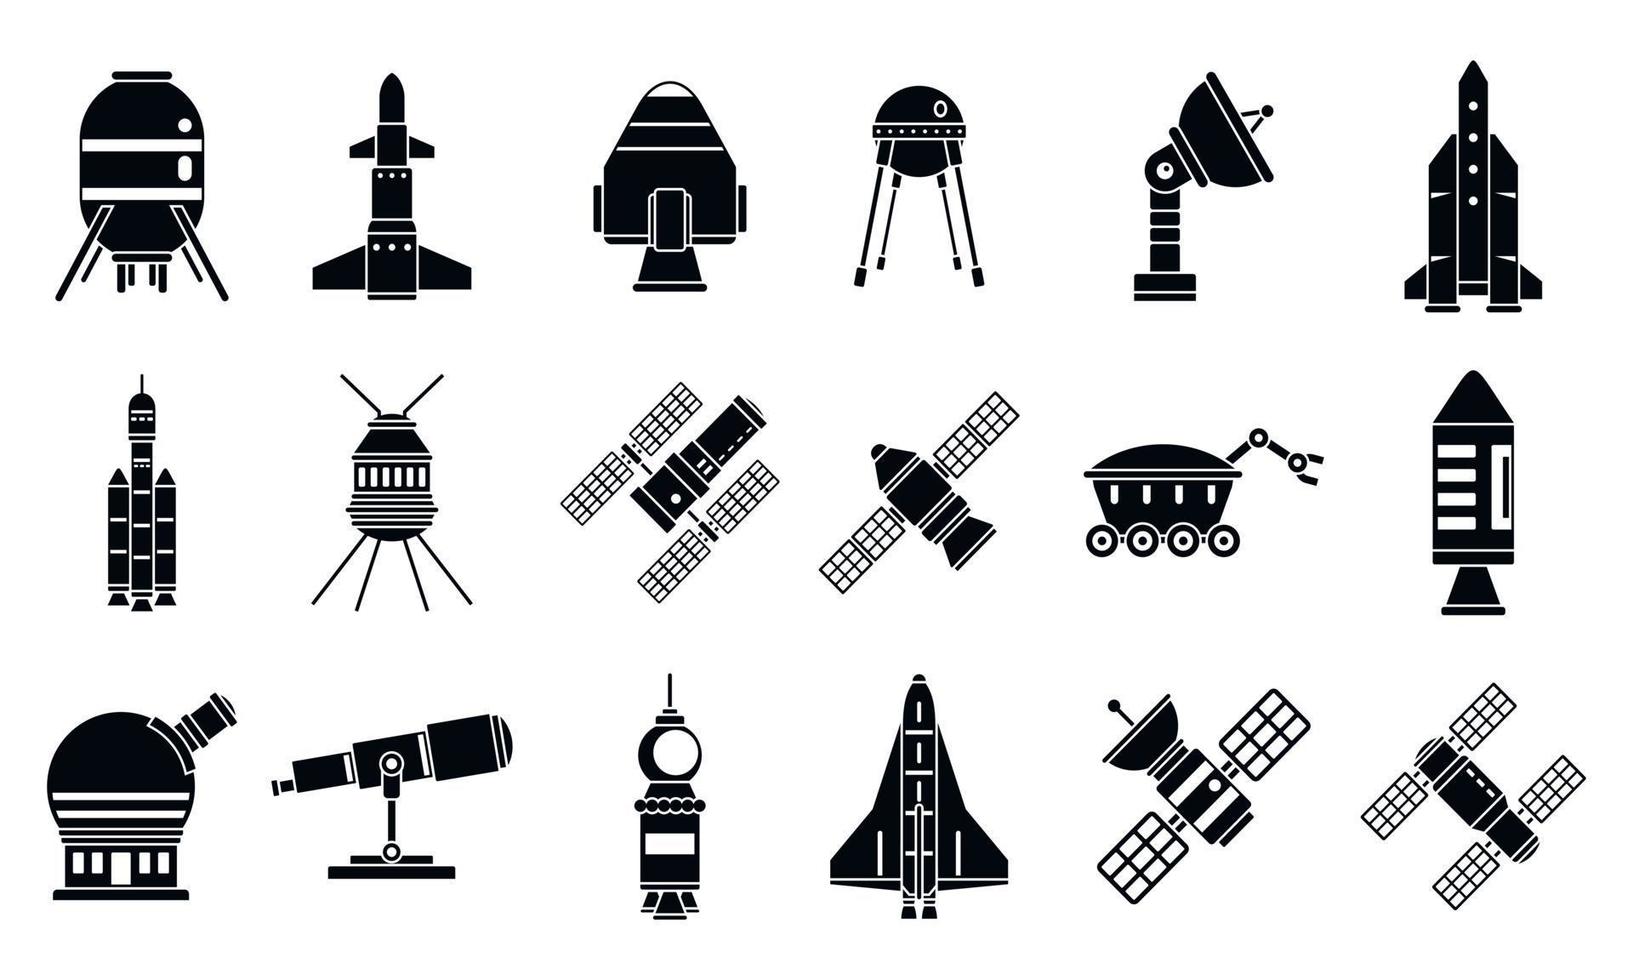 Spaceship research technology icons set, simple style vector